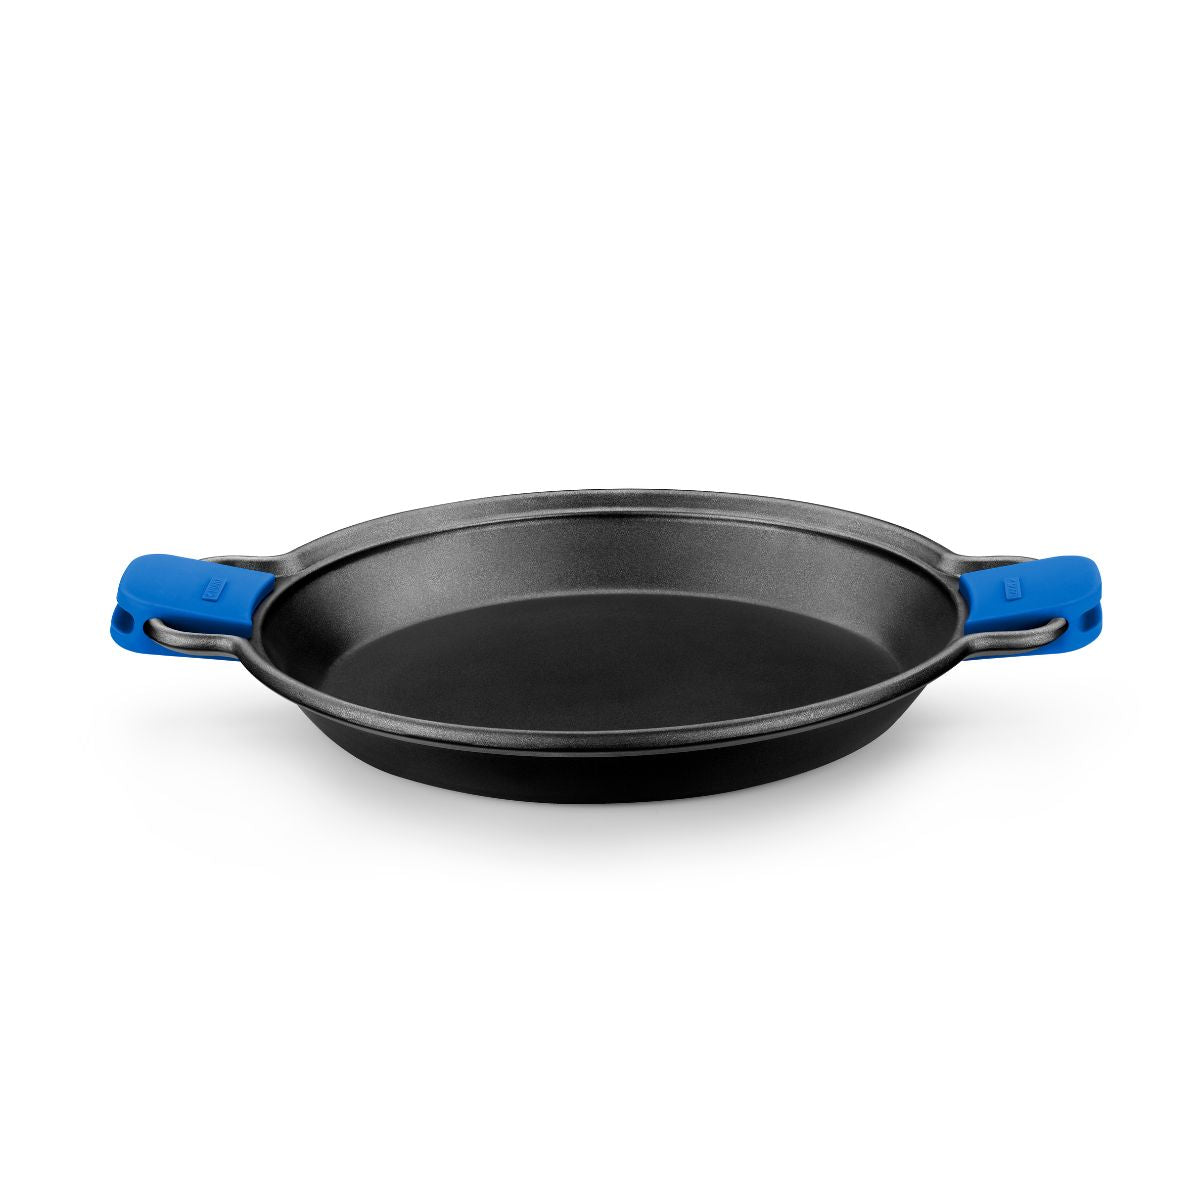 Solid+ Paella Pan with Silicone Handles